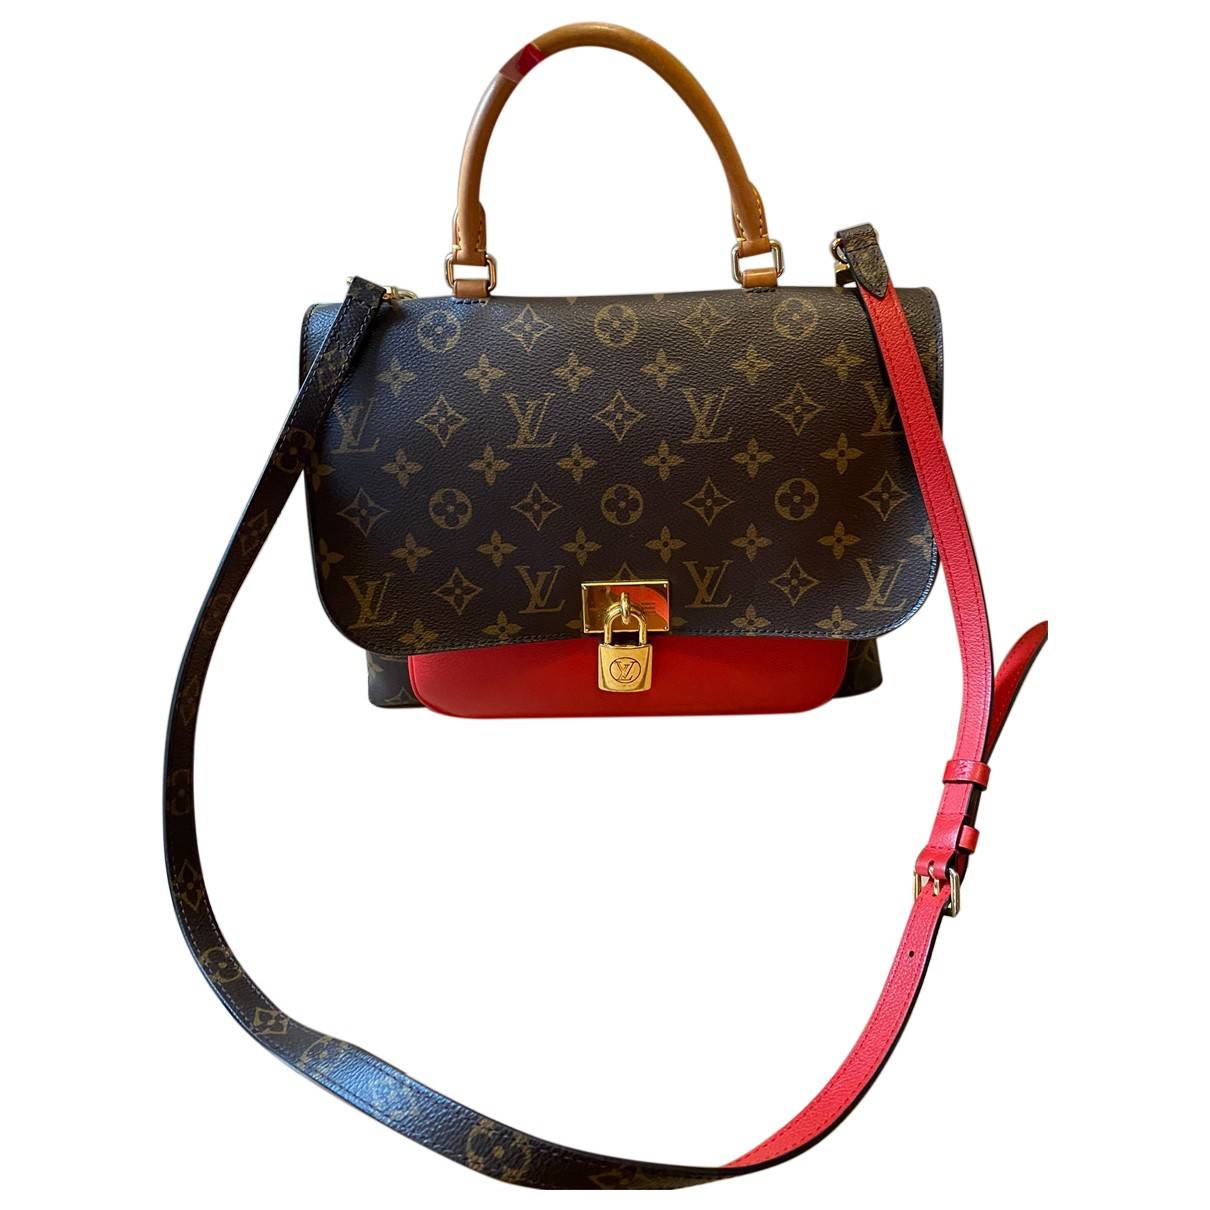 Marignan leather handbag Louis Vuitton Red in Leather - 37247578